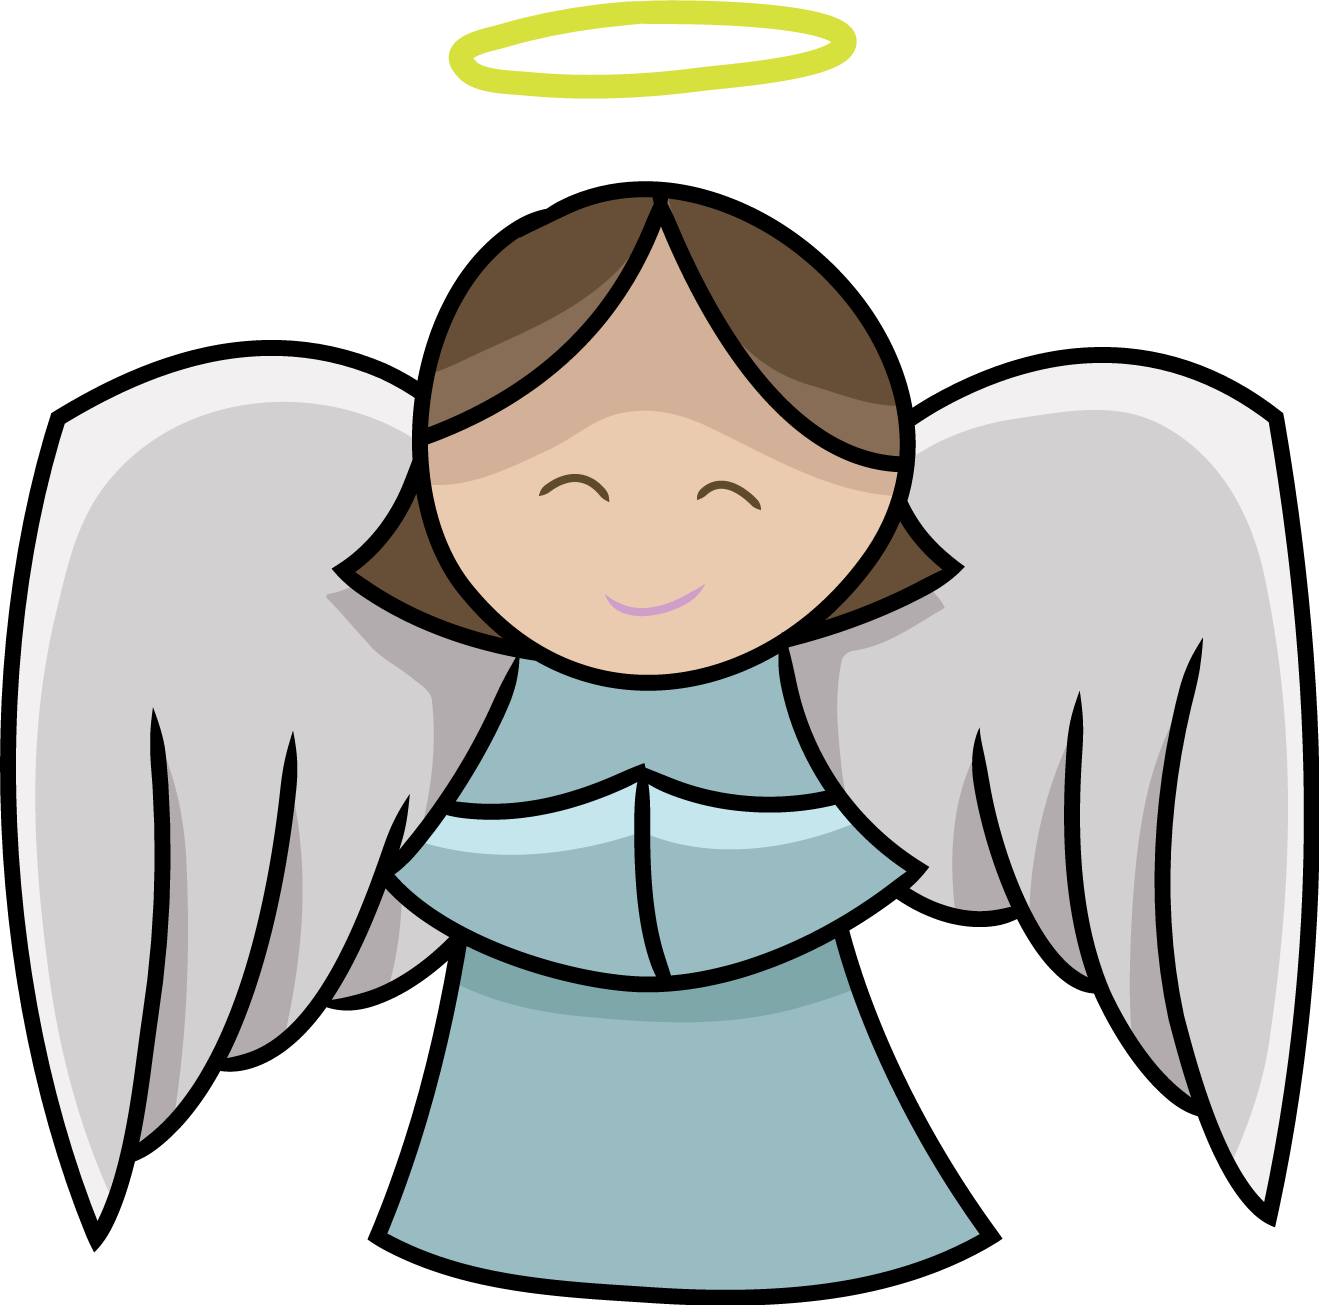 angel clipart free download - photo #4